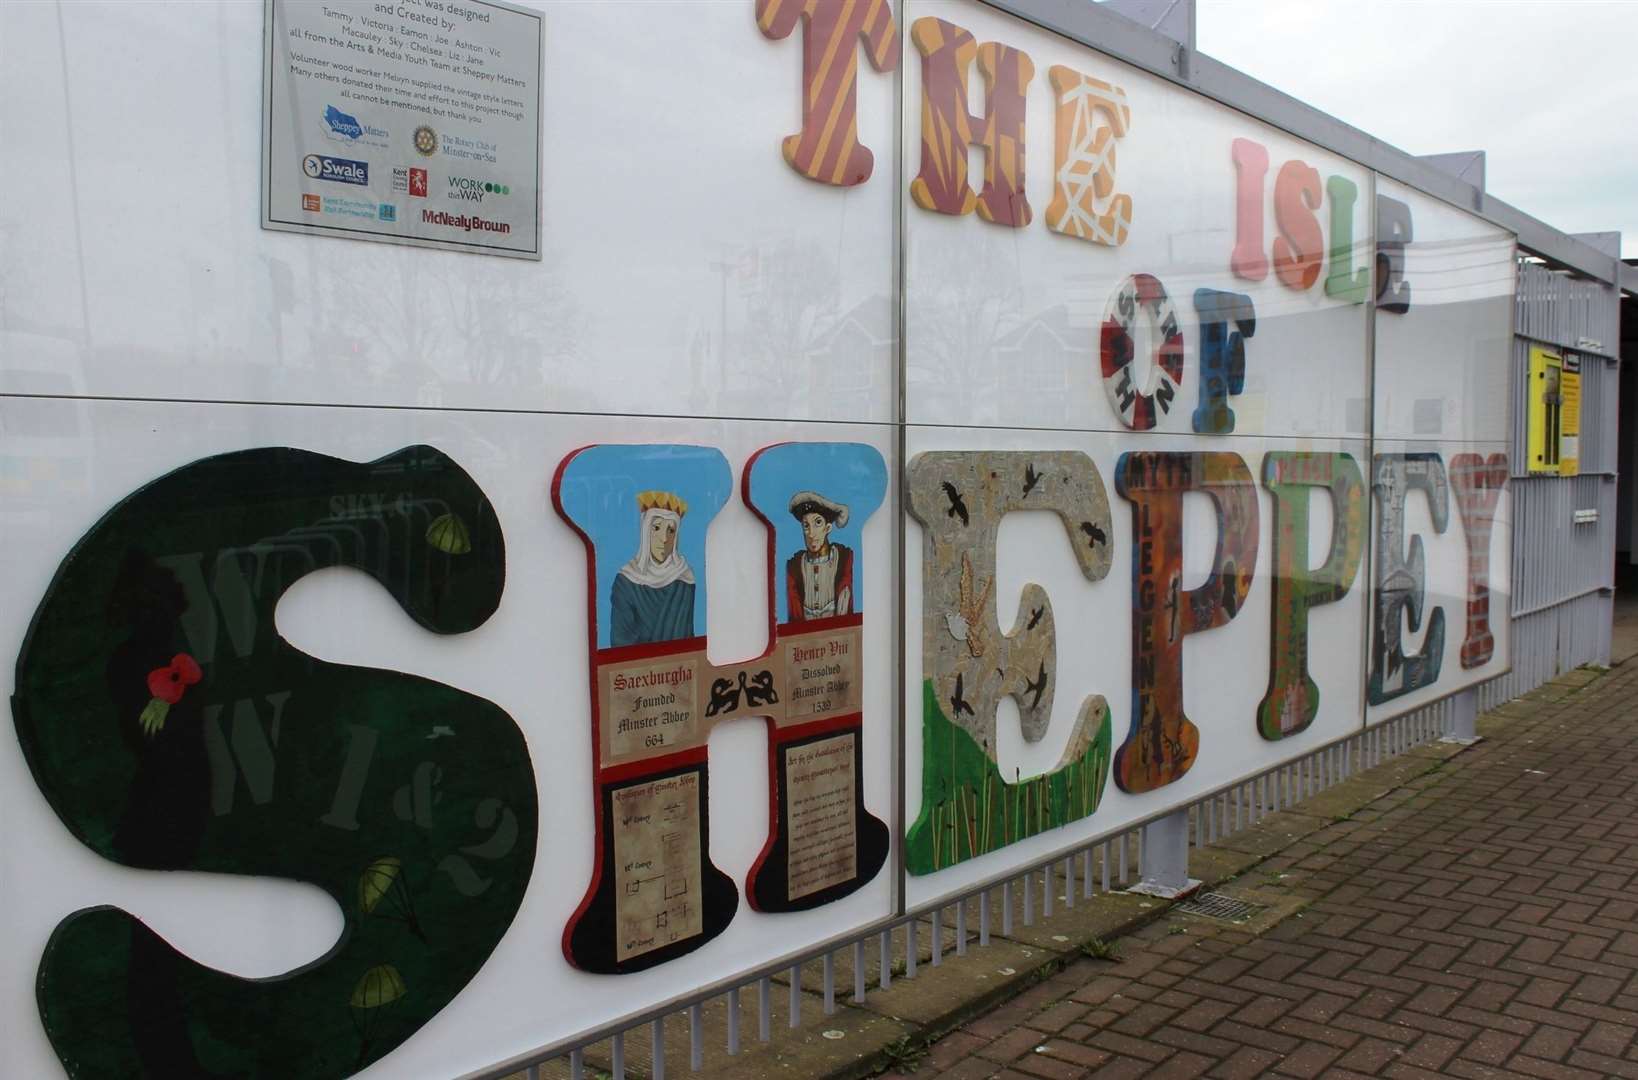 Sheppey will play host to the event for two weeks